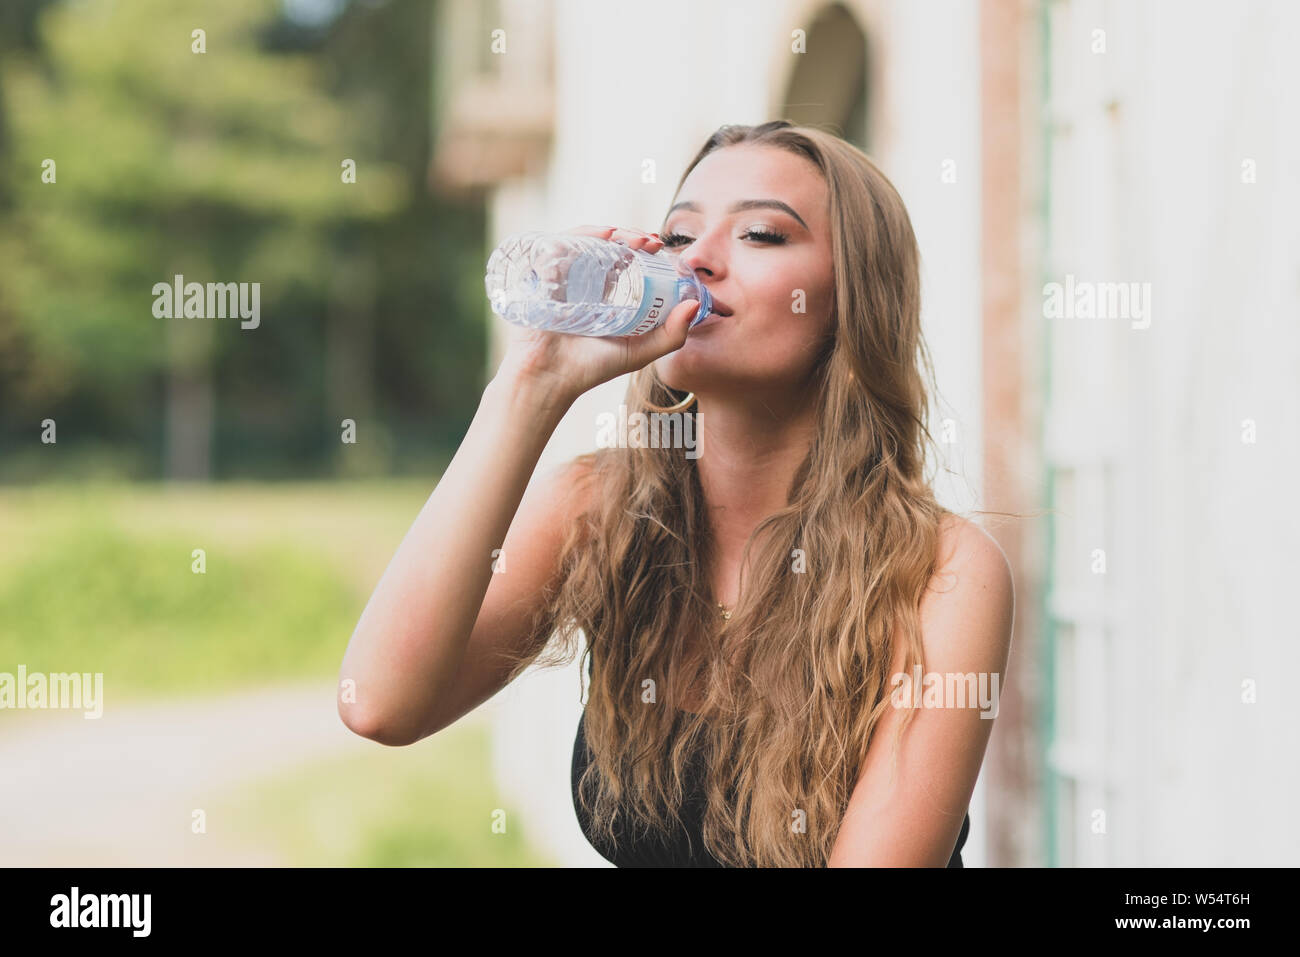 young girl drinking from water bottle Stock Photo